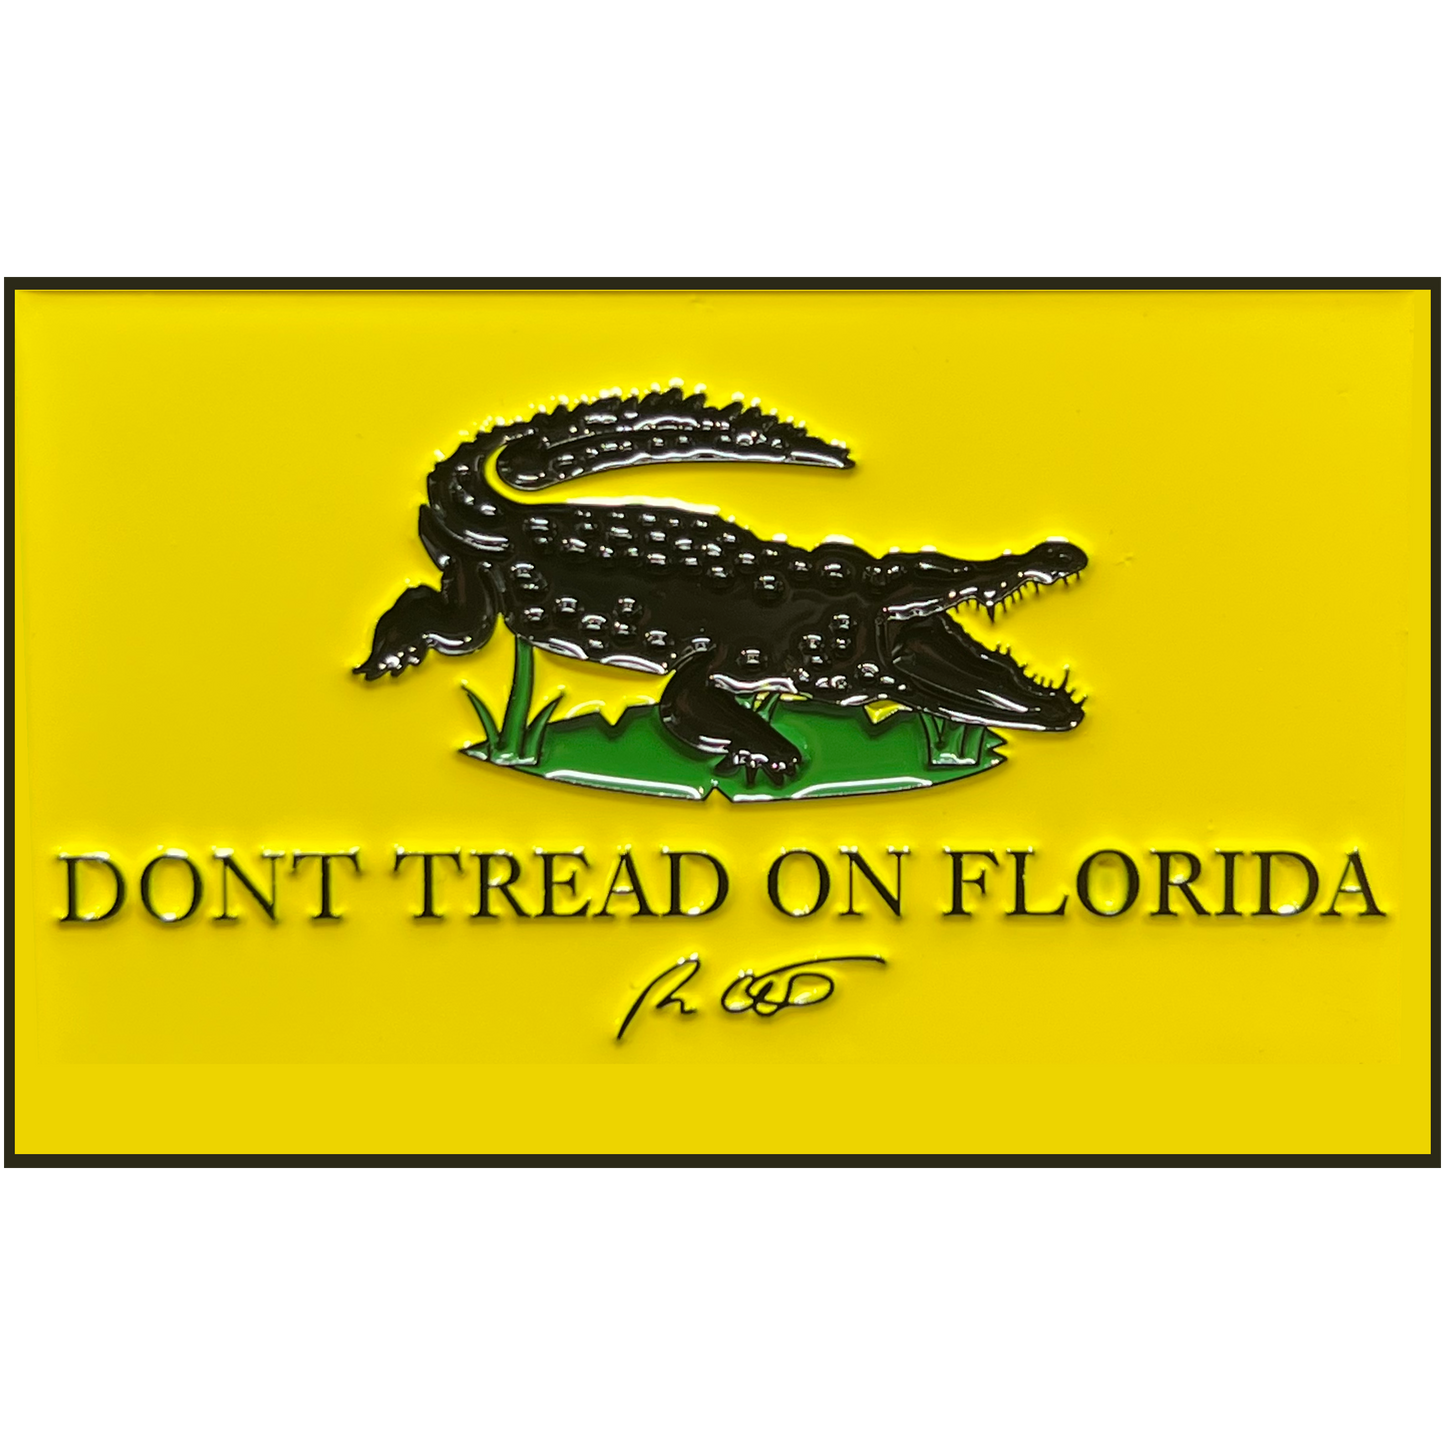 GL1-006 Florida Governor Ron DeSantis inspired Don't Tread on Florida 2nd Amendment Police Thin Blue Line Flag Challenge Coin